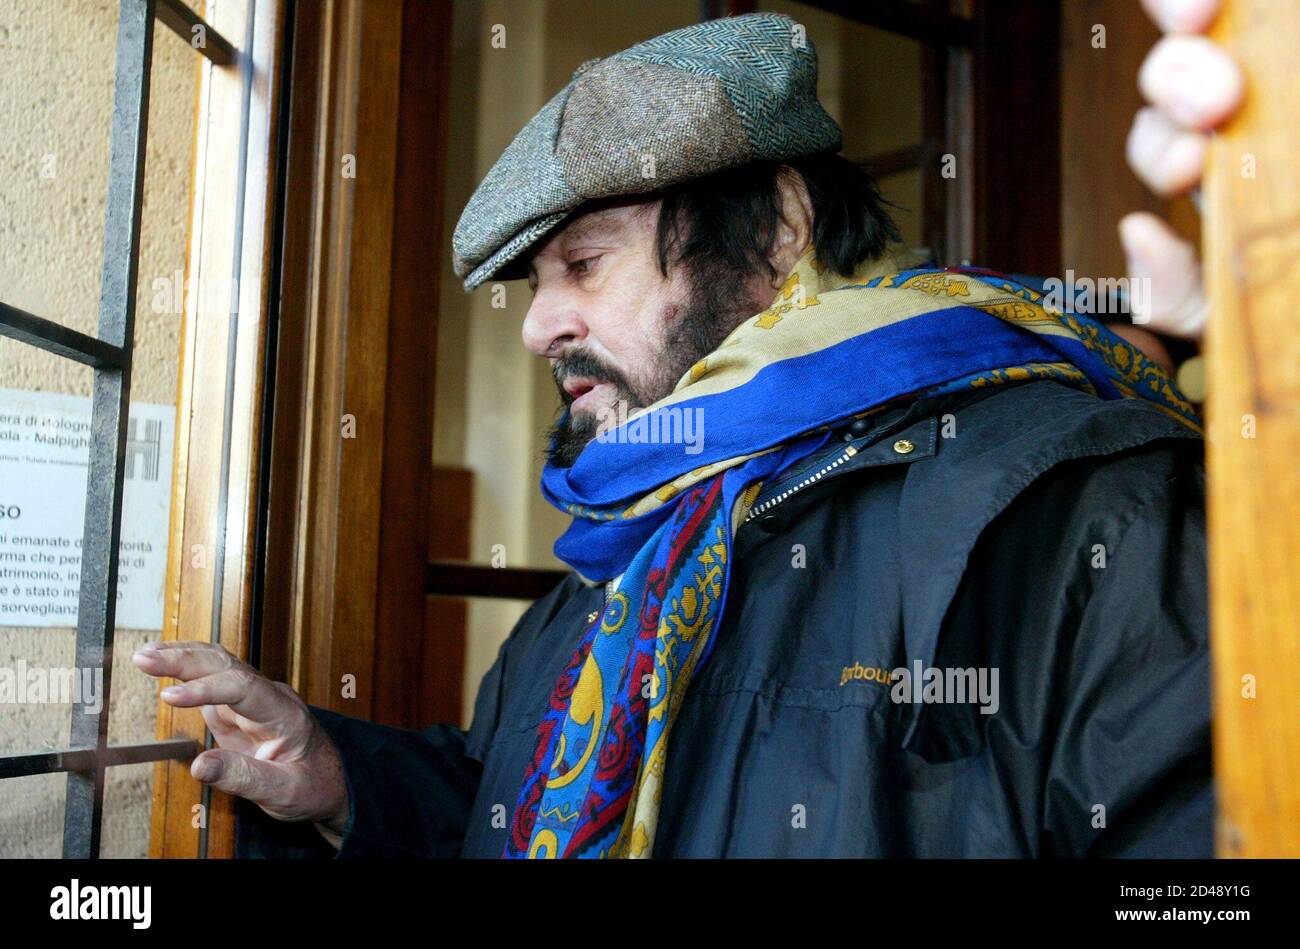 Italian opera star Luciano Pavarotti gets out of car upon his arrival at  Saint Orsola hospital in Bologna, northern Italy, January 15, 2003.  [Nicoletta Mantovani, Pavarotti's partner, has given birth to a